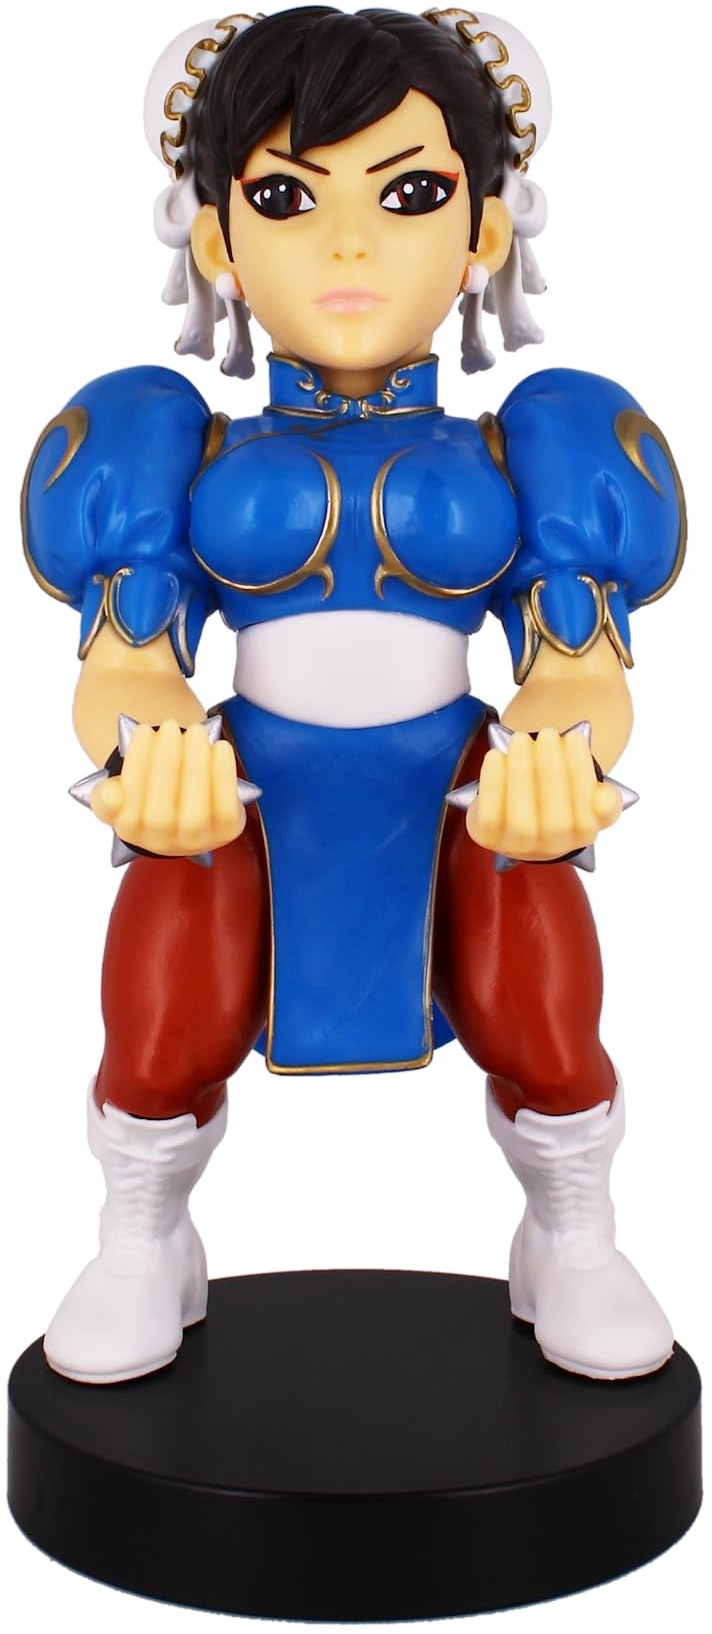 Cable Guys - Capcom Street Fighter Chun Li Gaming Accessories Holder & Phone Holder for Most Controller (Xbox, Play Station, Nintendo Switch) & Phone